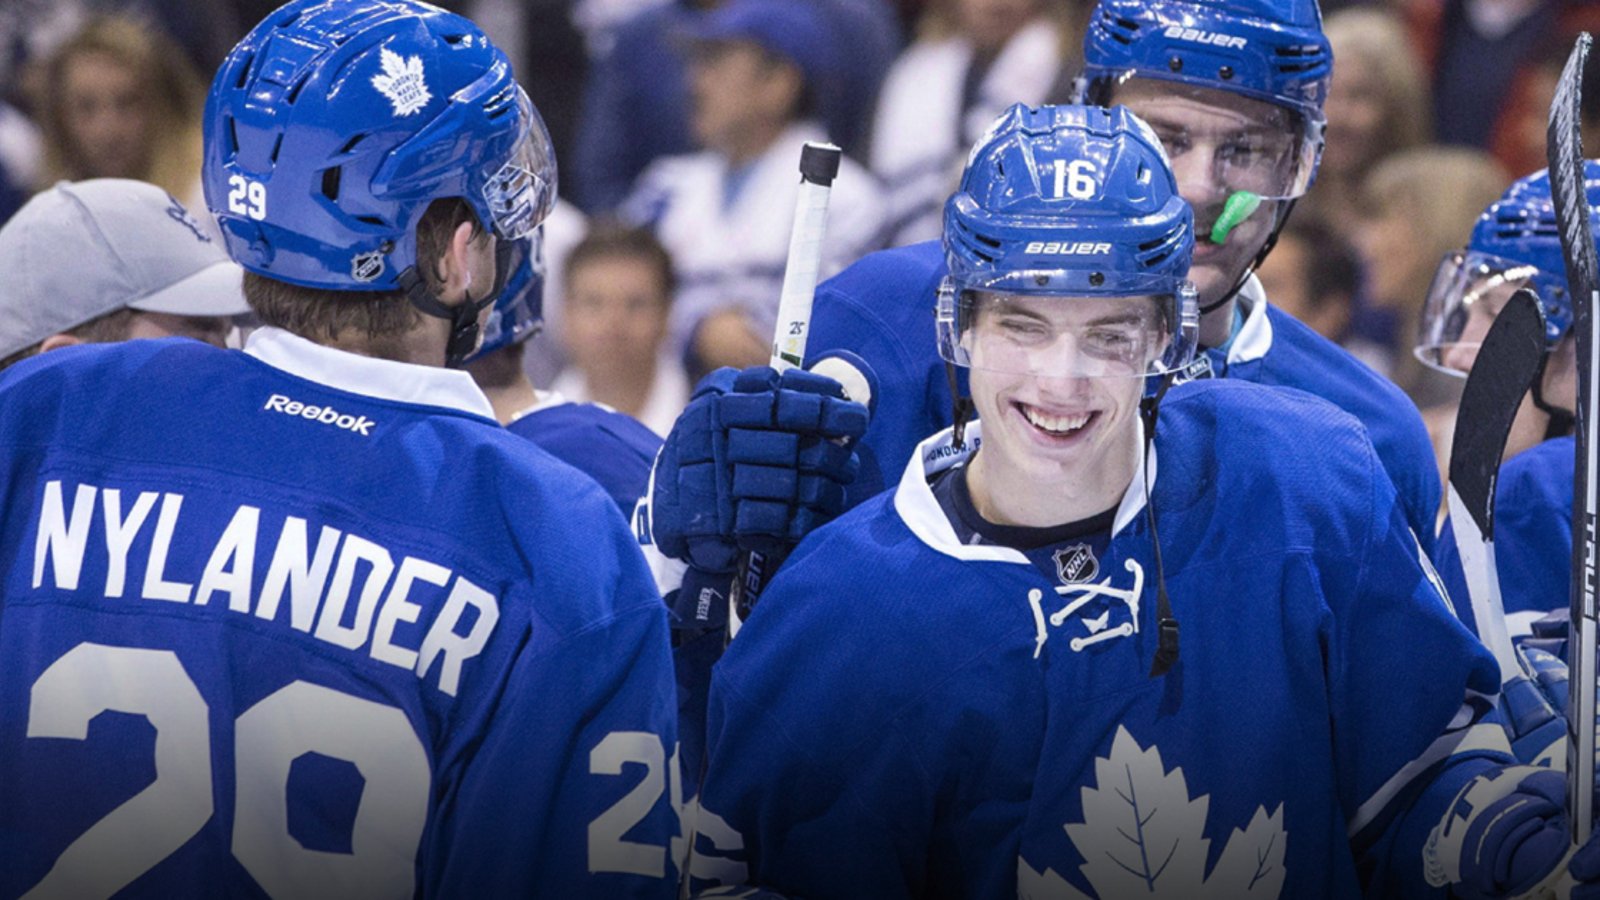 Your Call: Who’s better? Marner or Nylander?